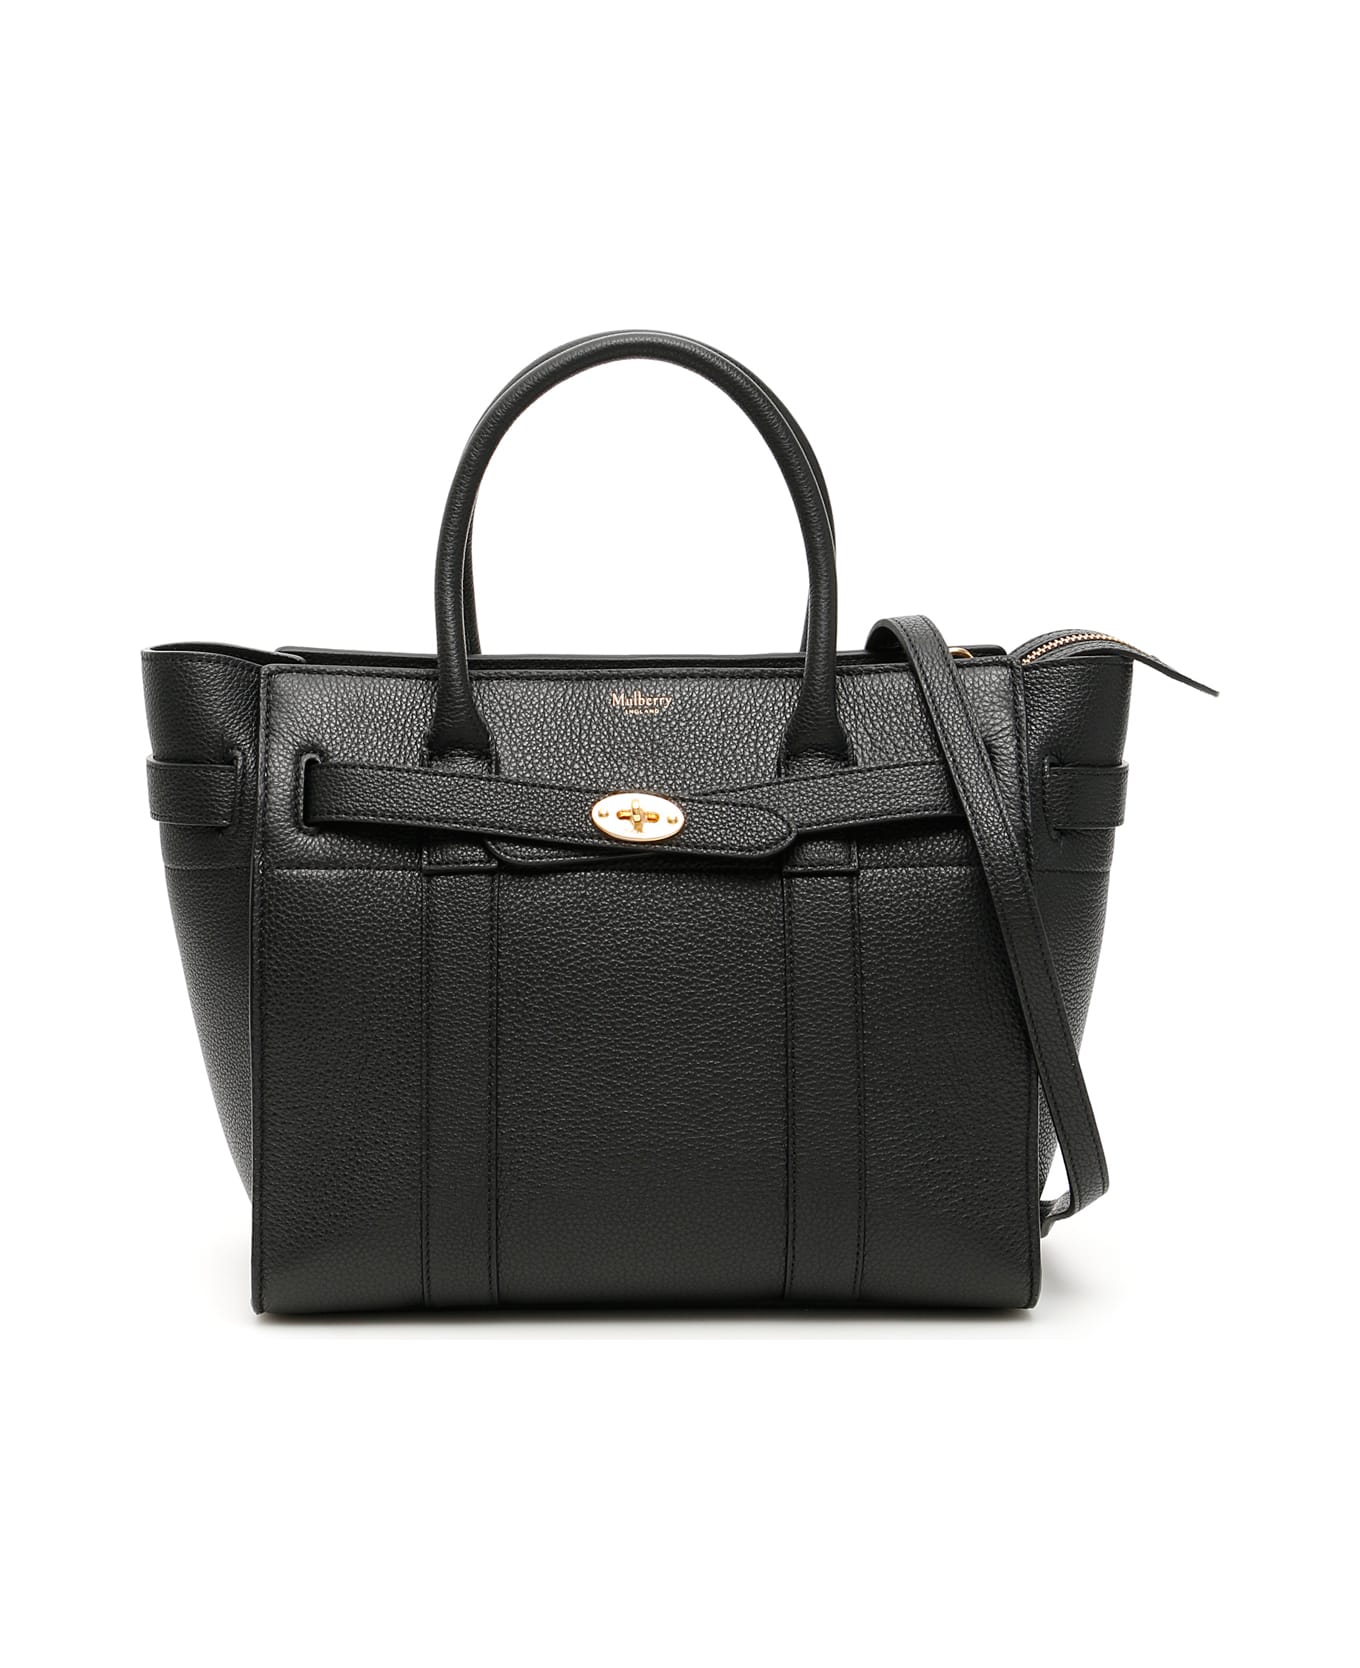 Mulberry Shopping 'small Zipped Bayswater' - Black